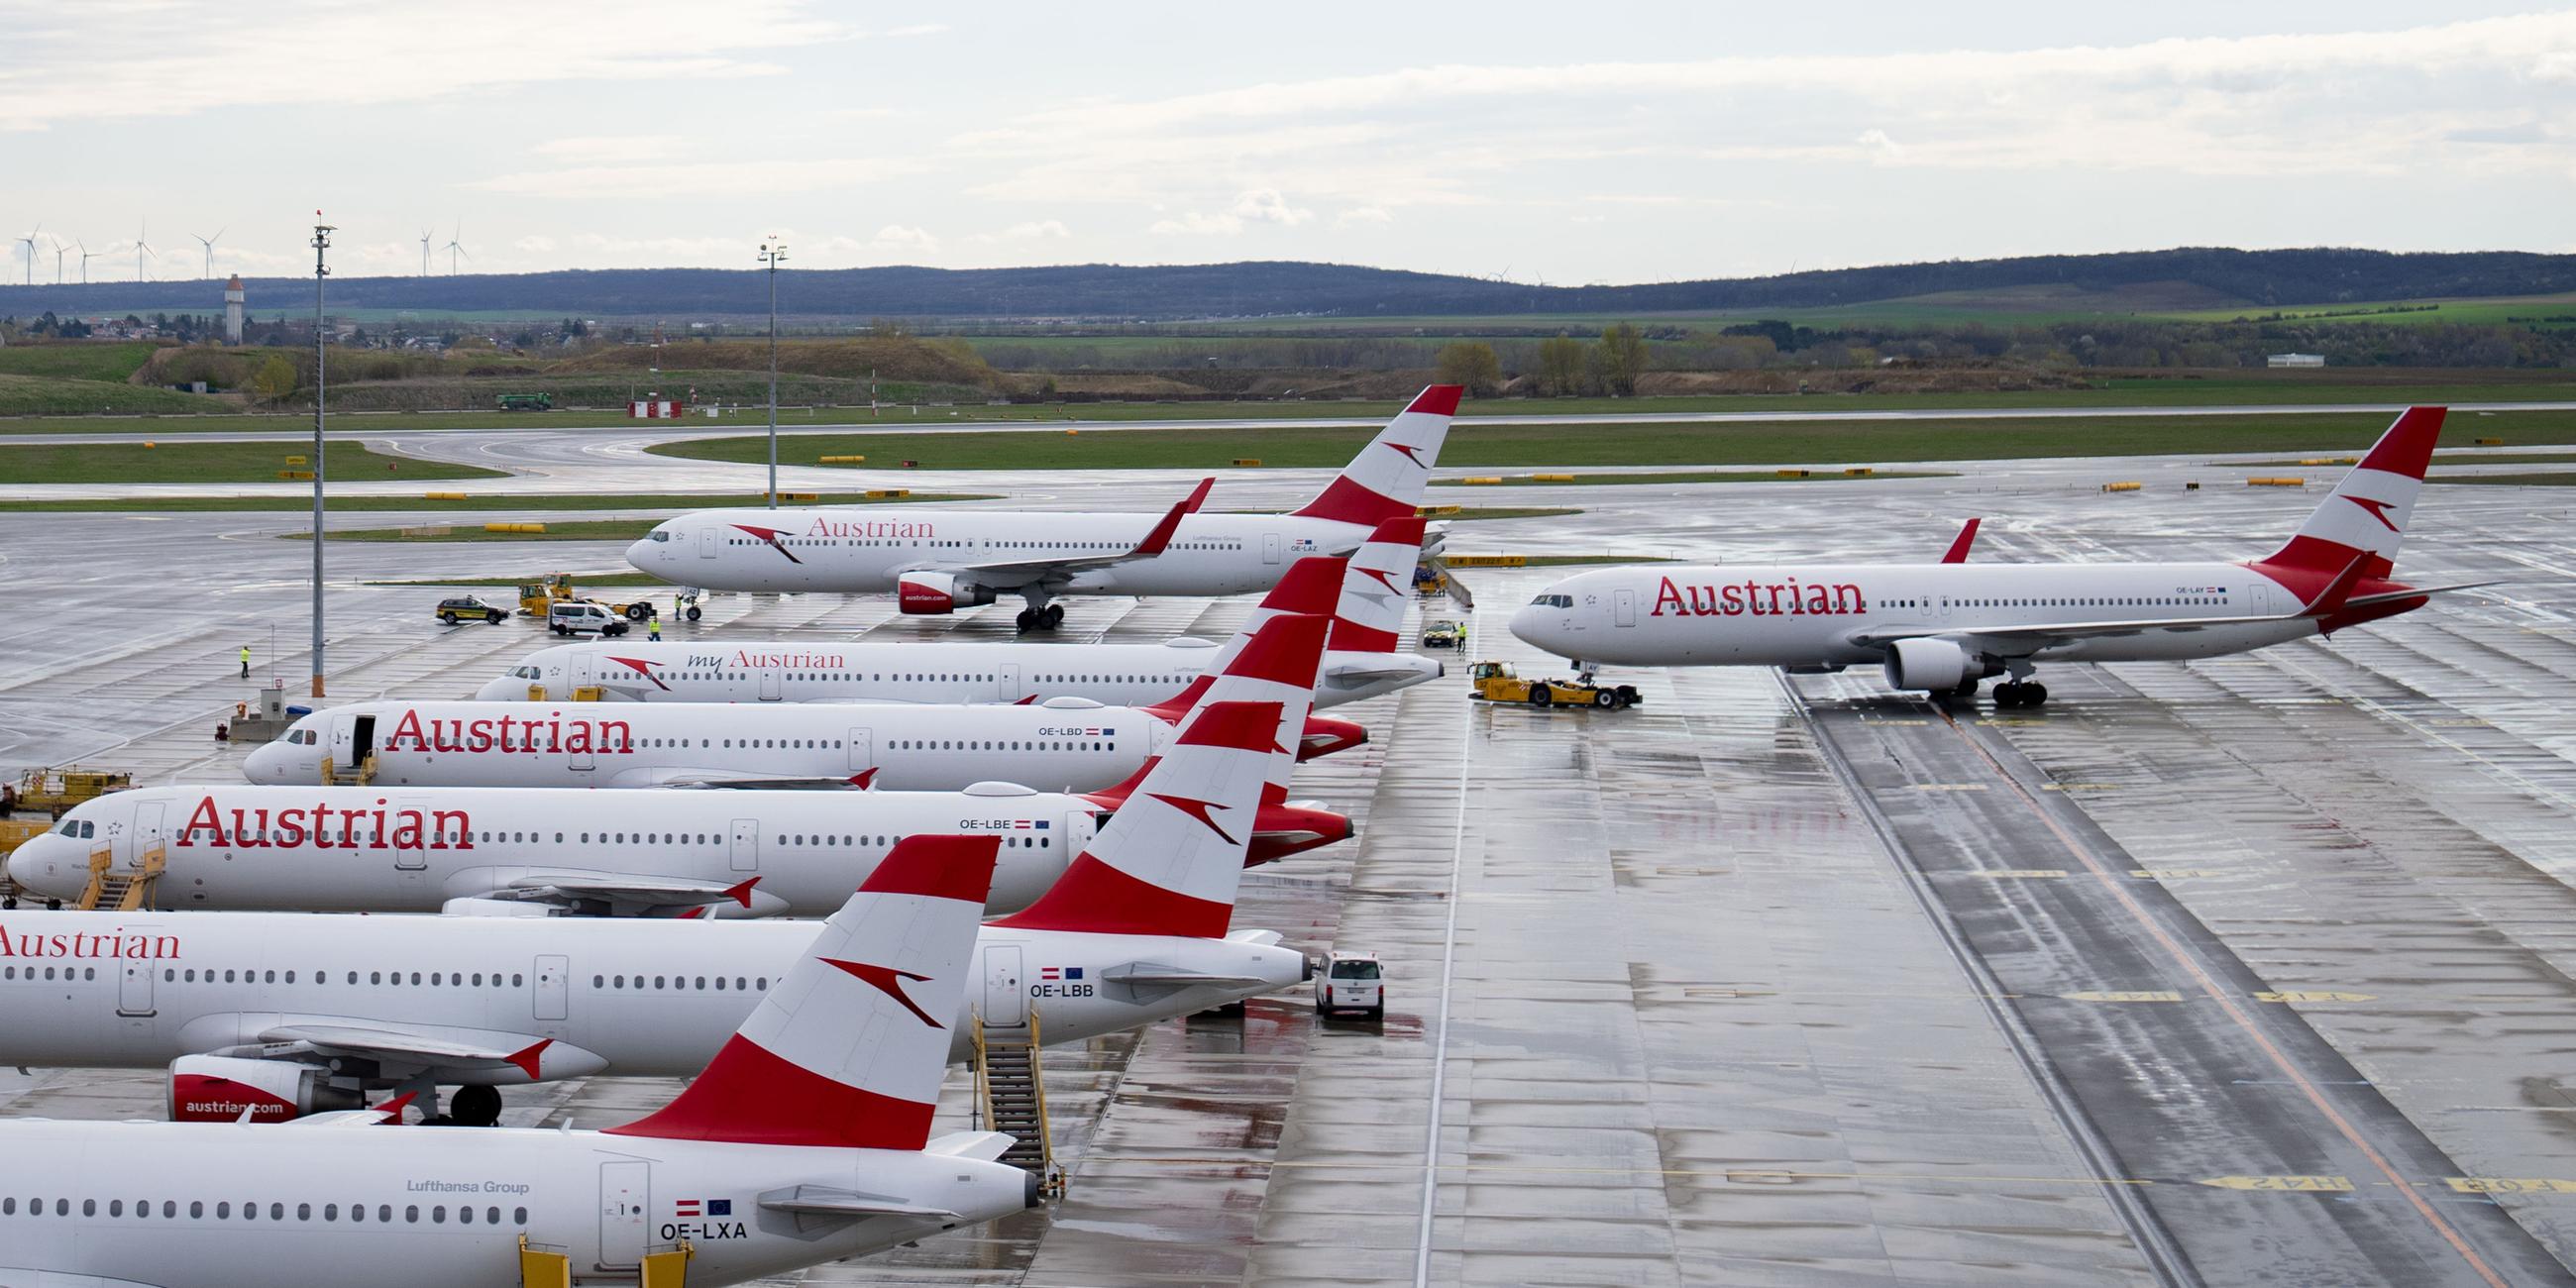 Typical: Austrian Airlines